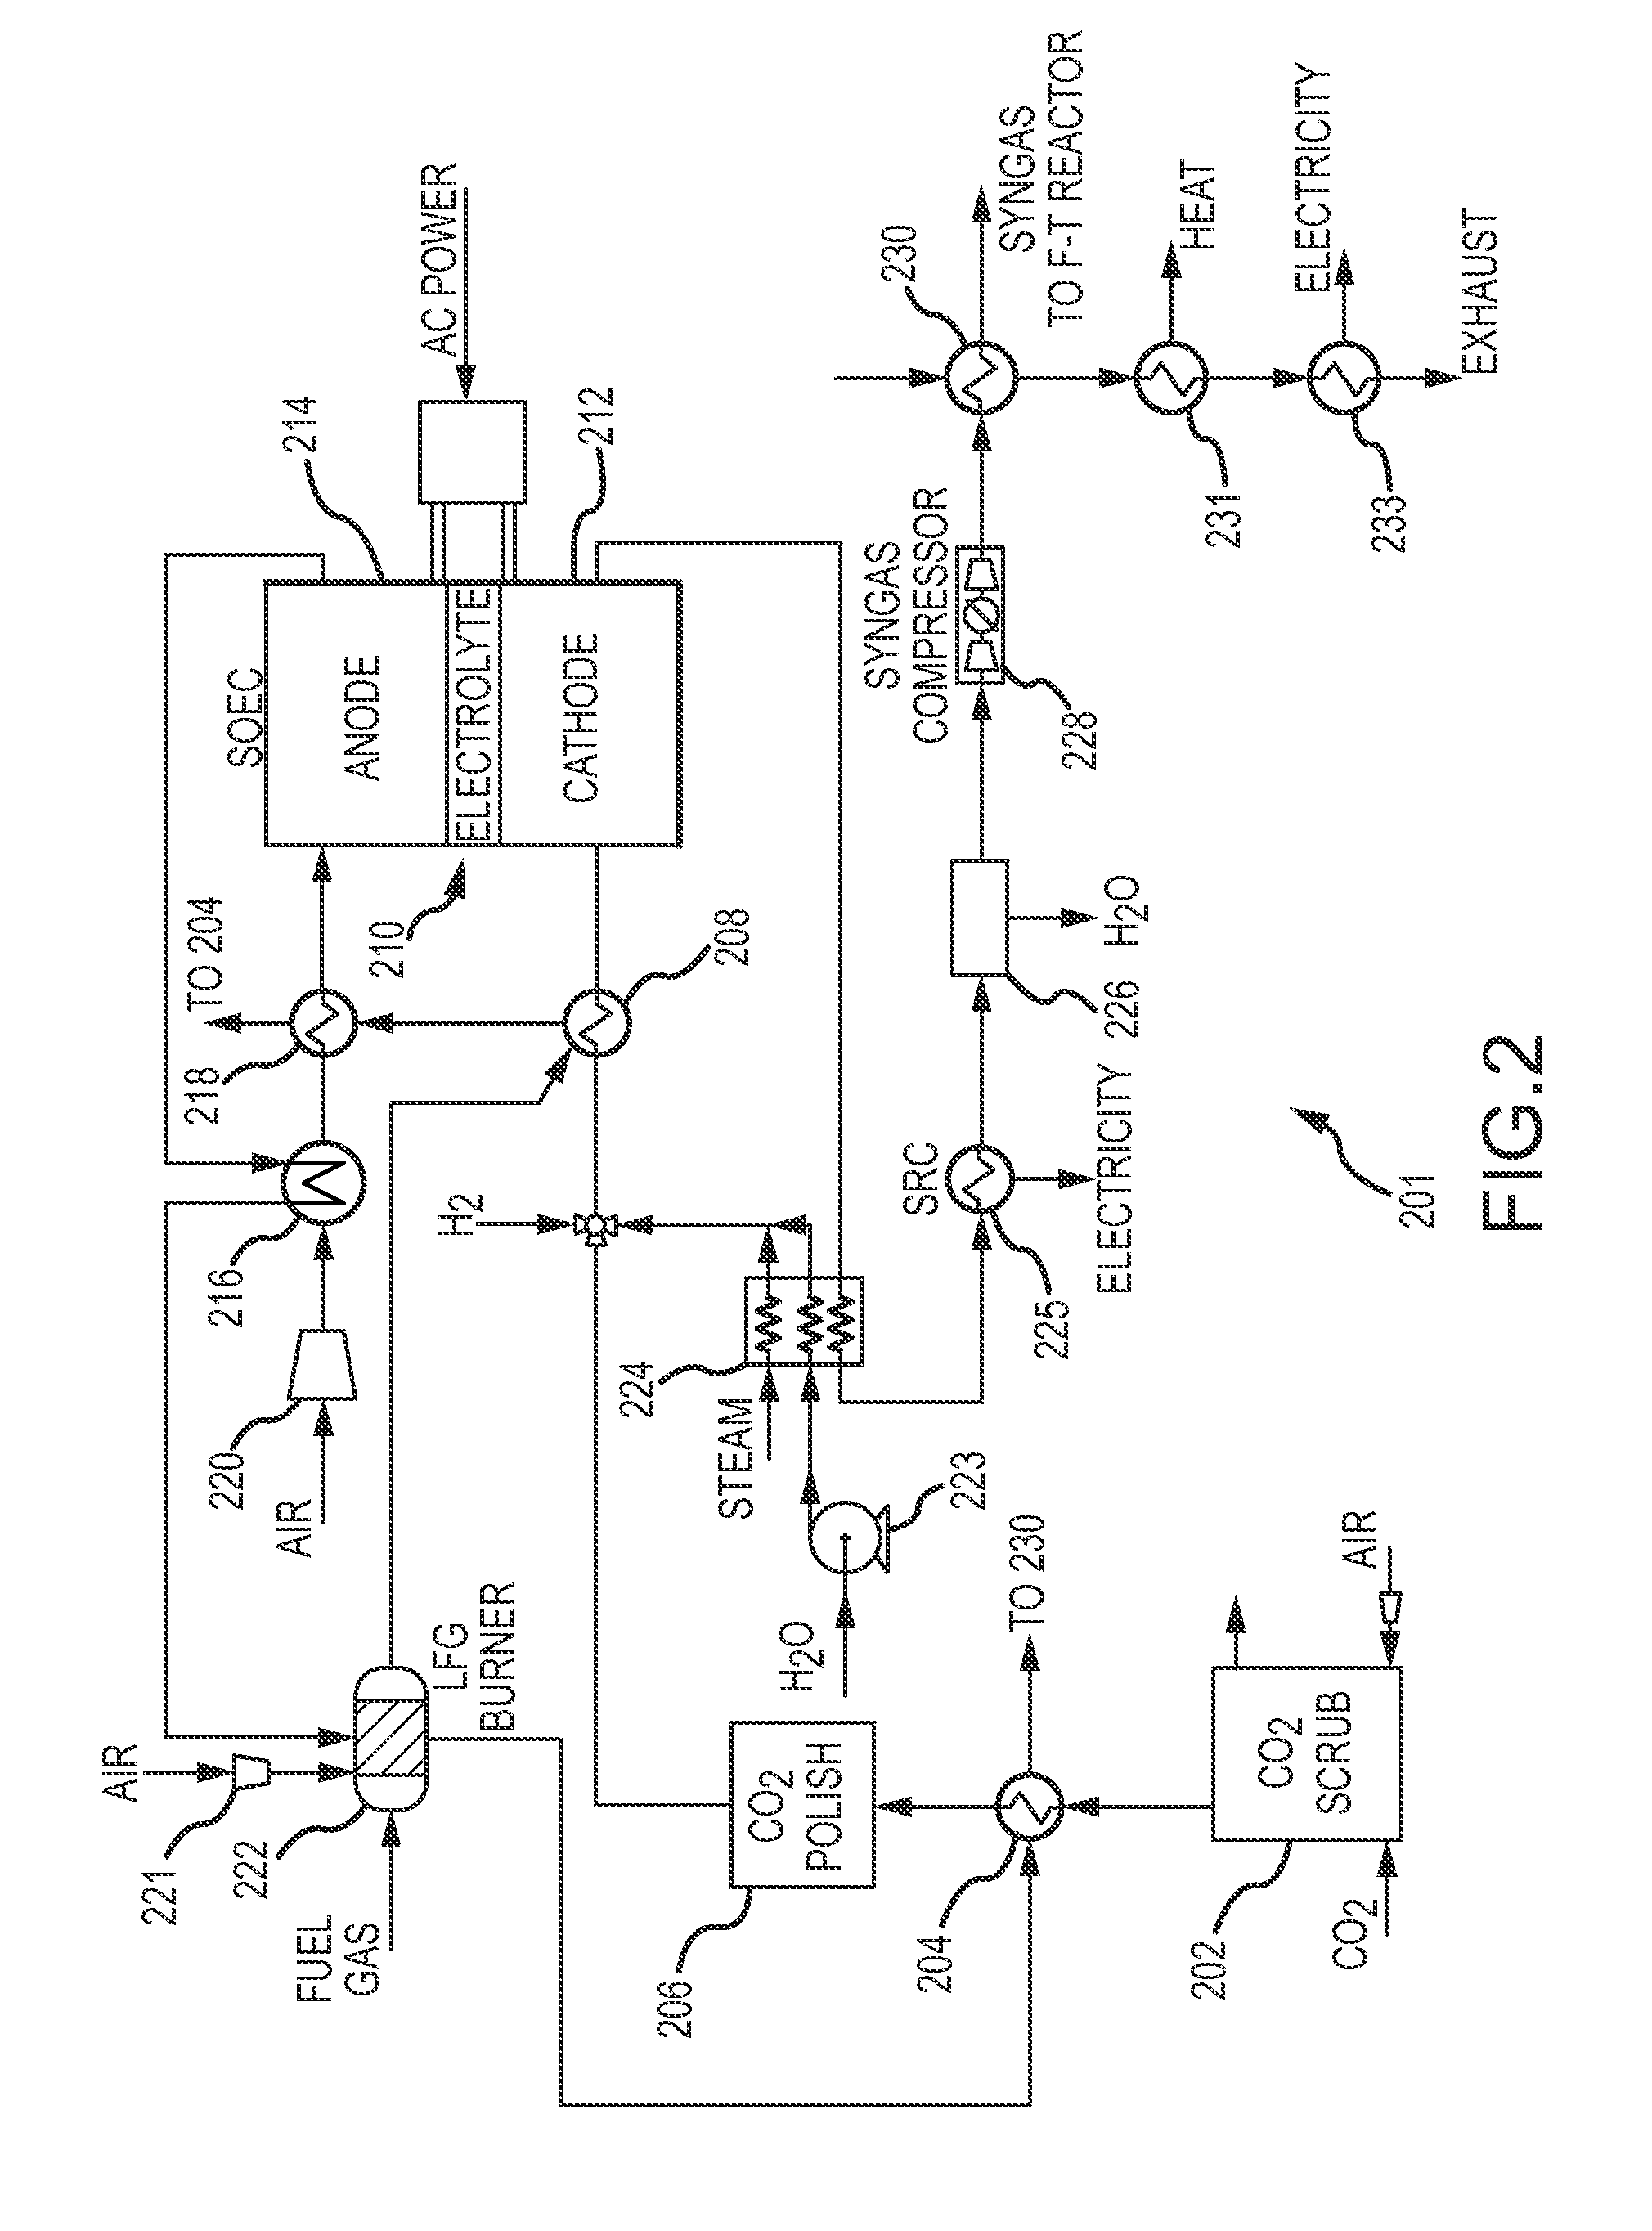 Electrochemical device for syngas and liquid fuels production